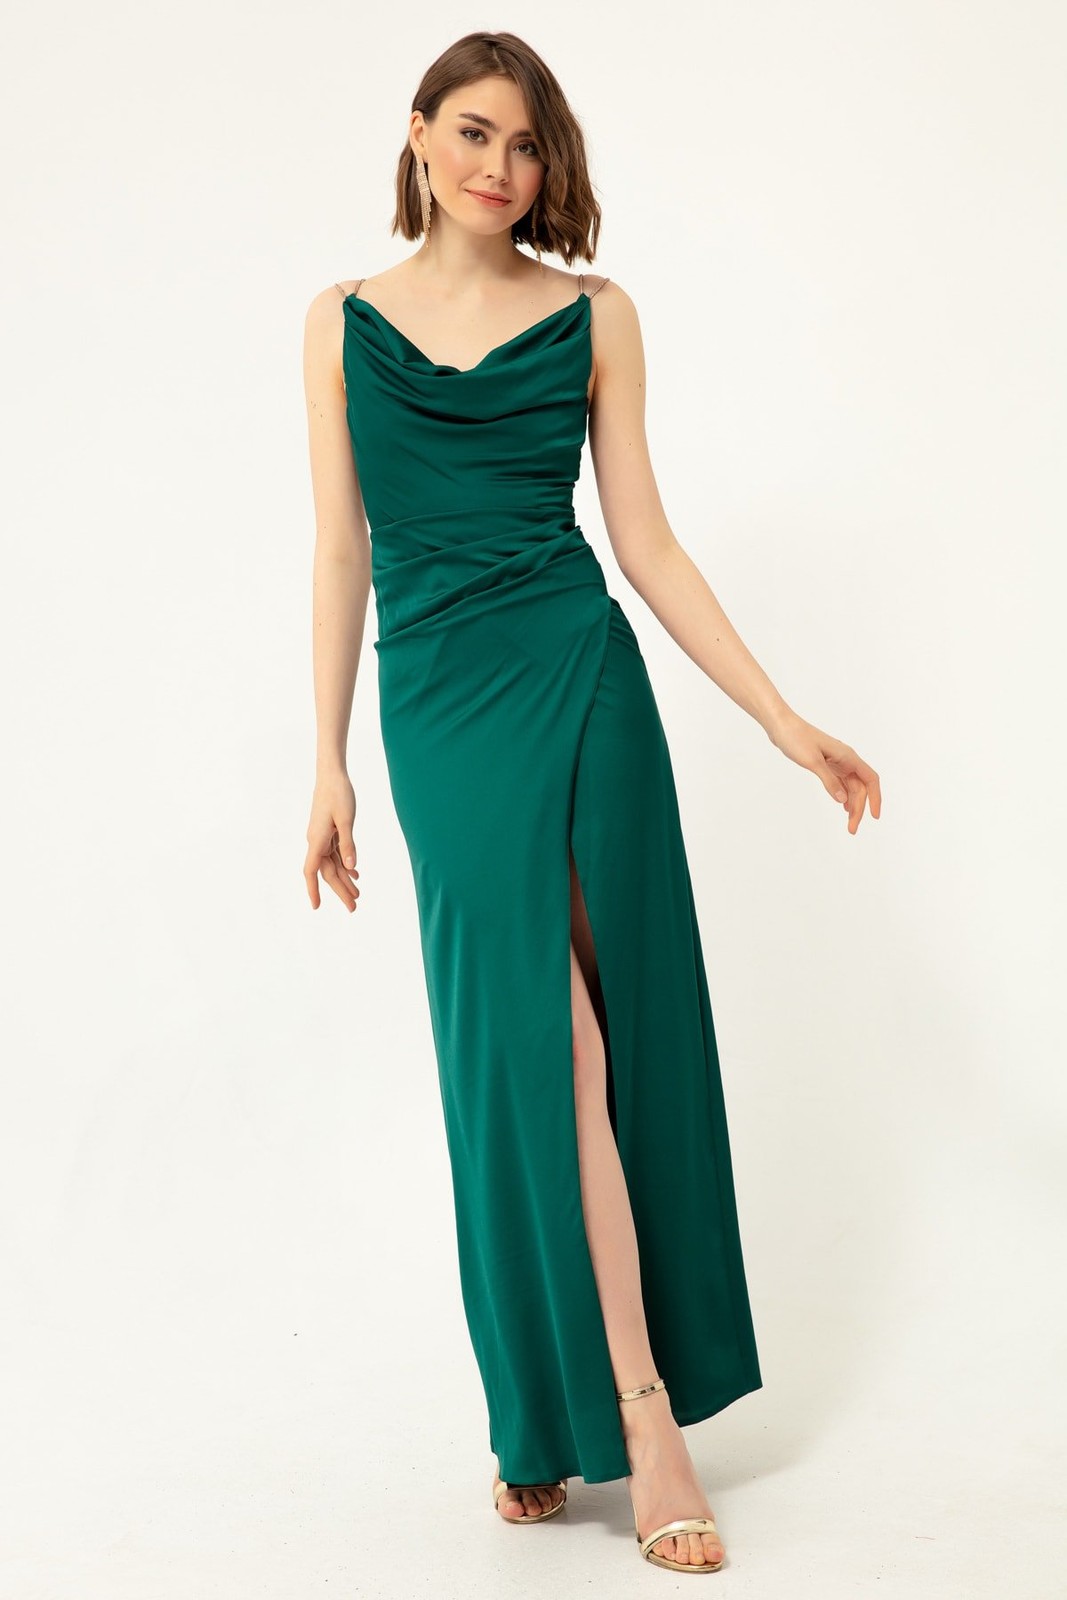 Lafaba Women's Emerald Green Evening Dress with Stone Straps, Plunger Collar Satin